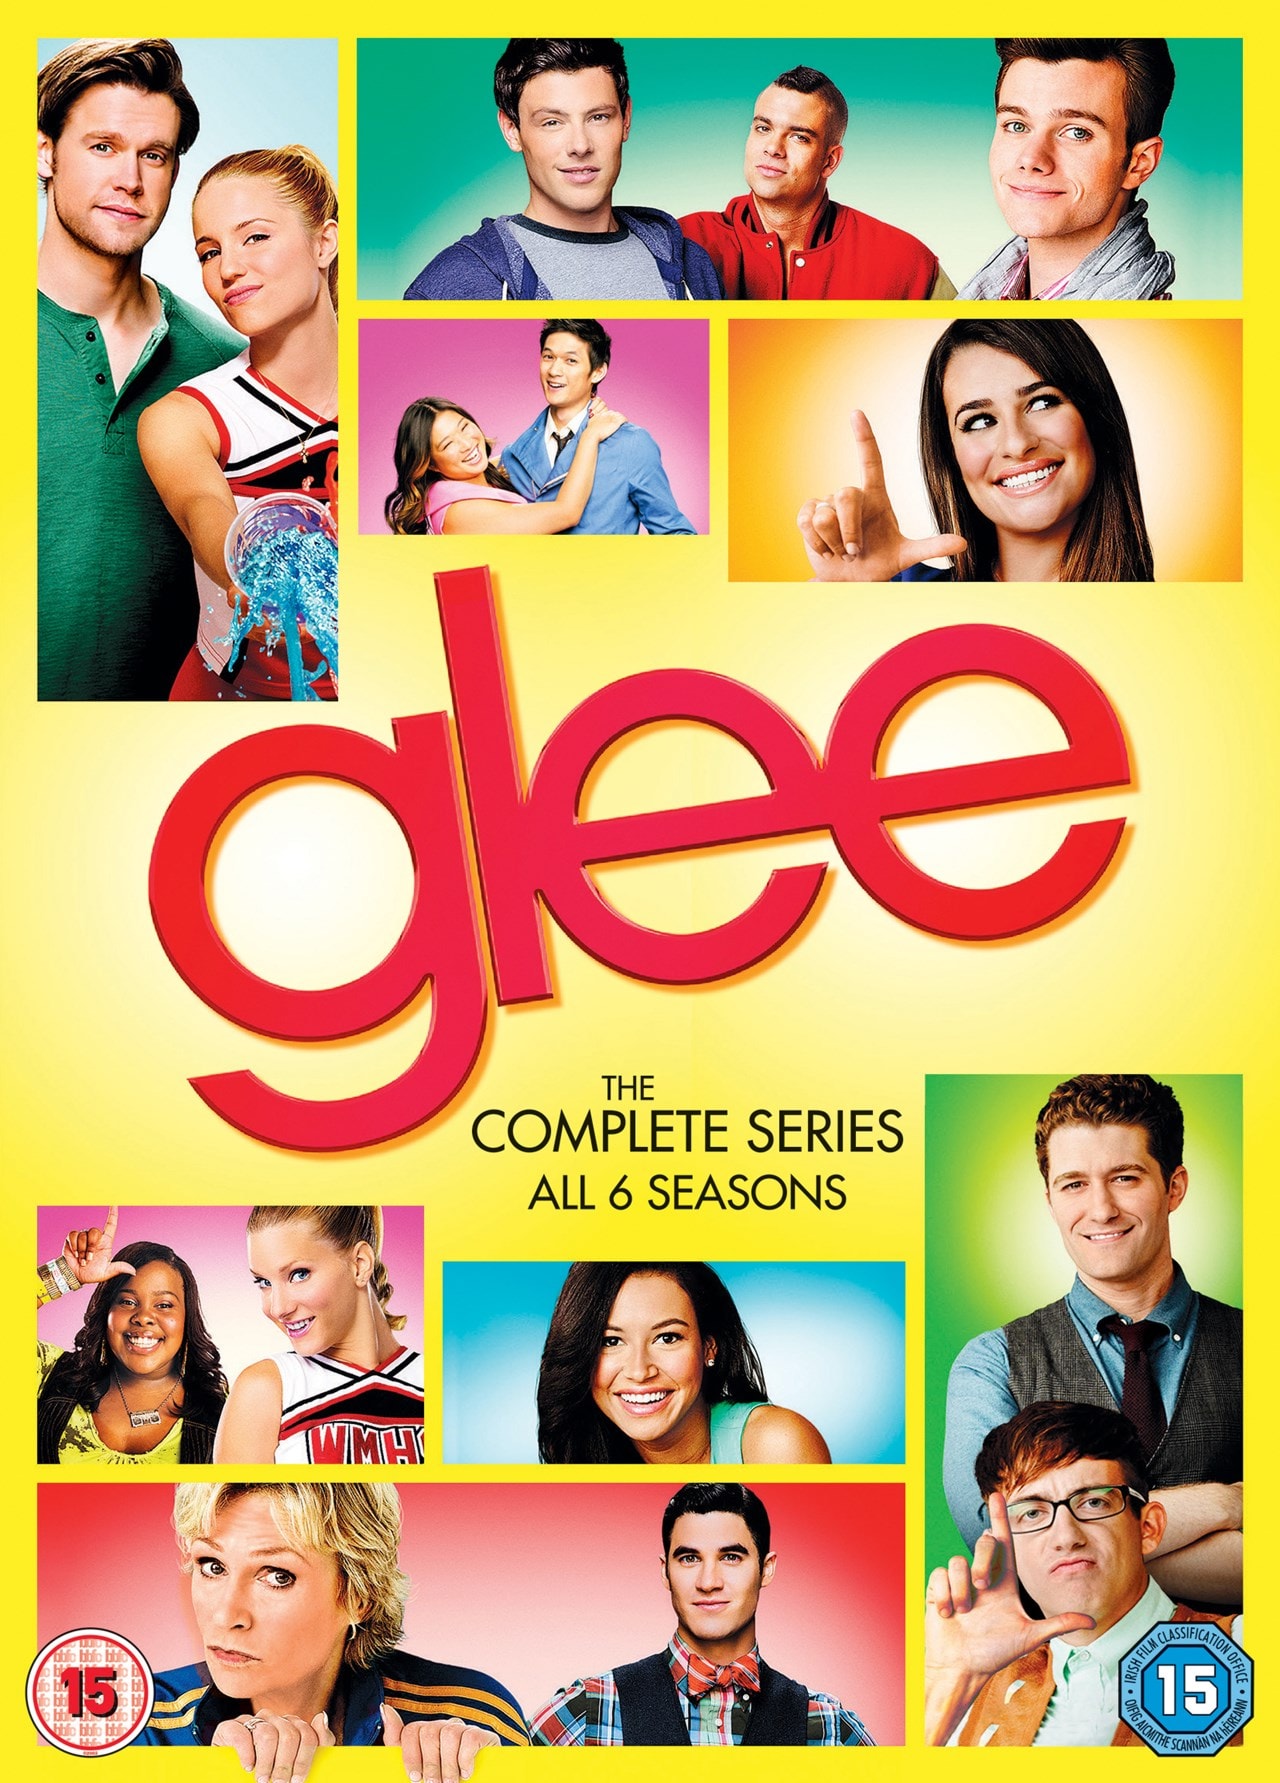 Glee The Complete Series Dvd Box Set Free Shipping Over Hmv Store